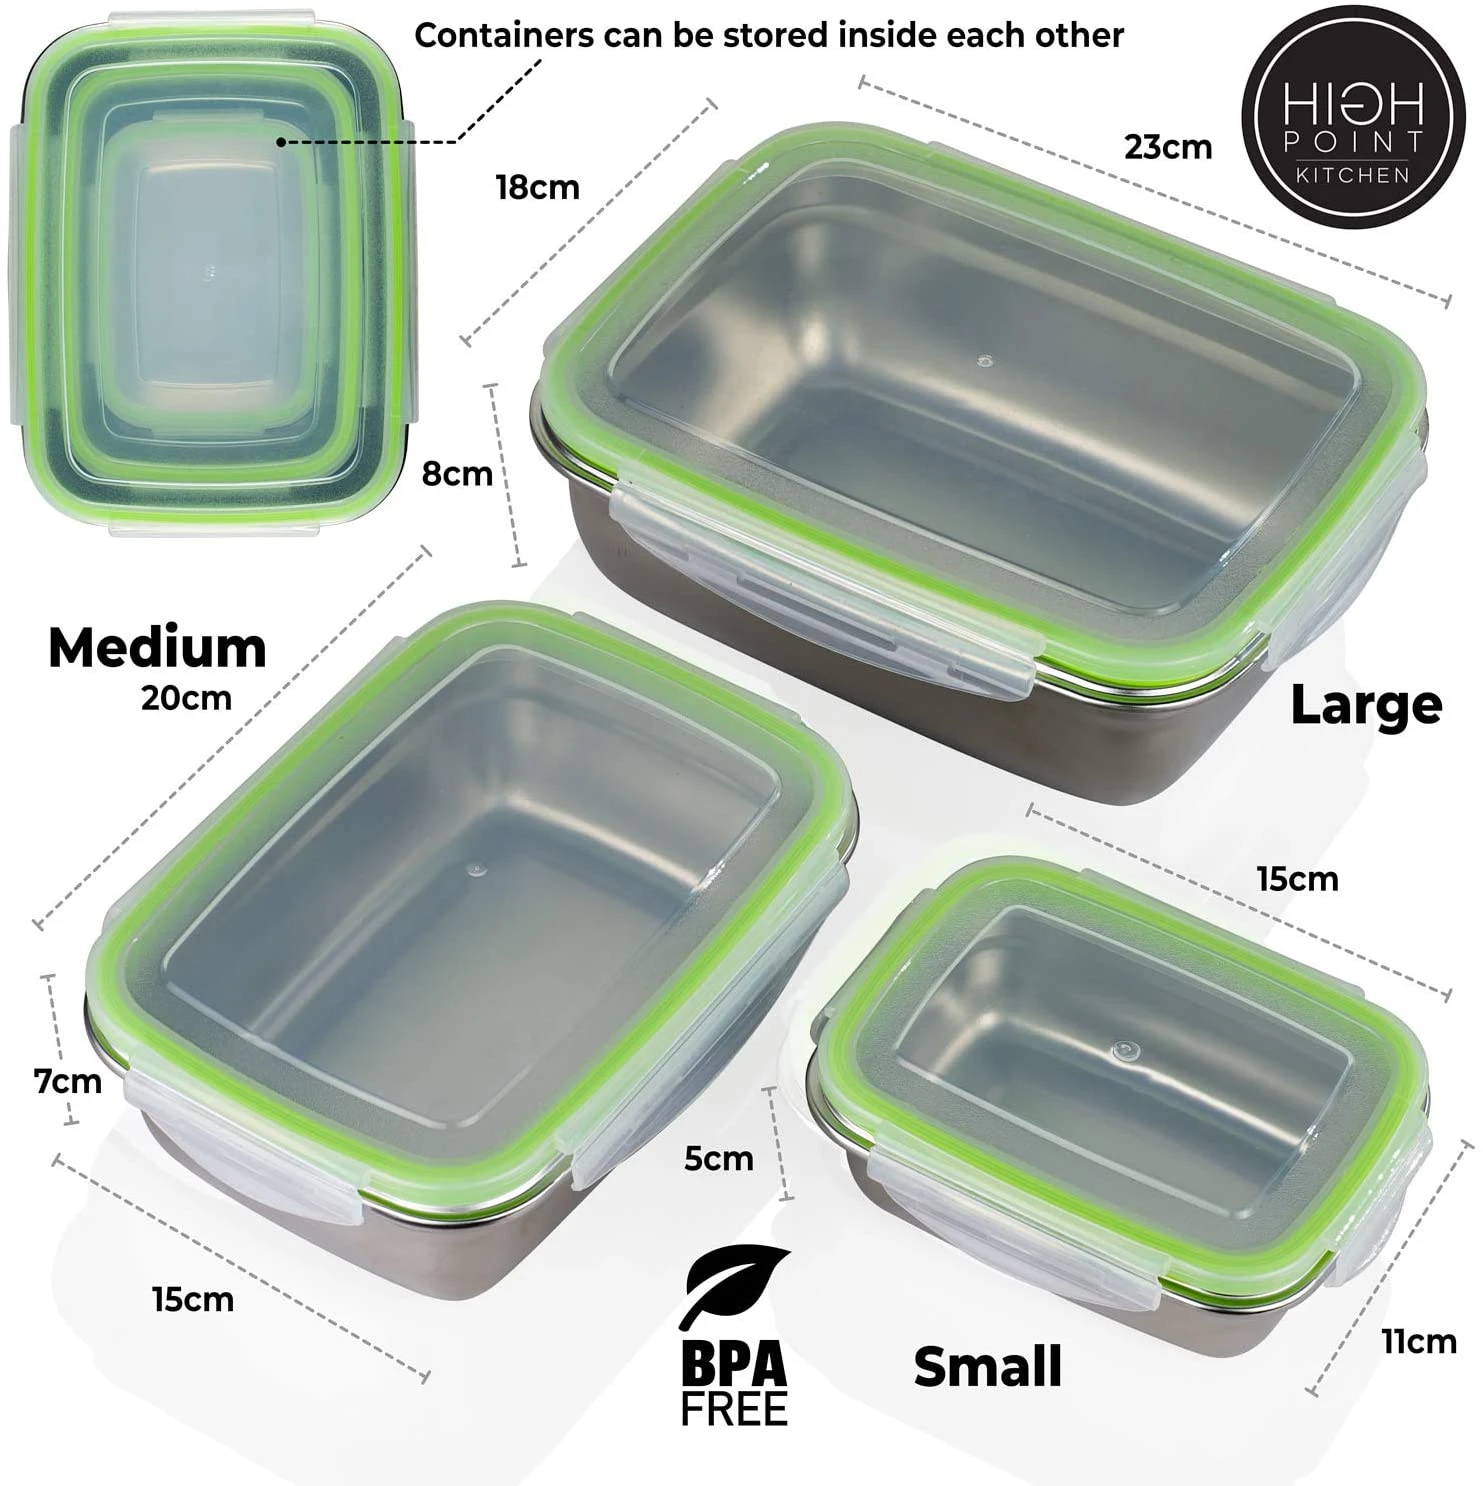 1800ml stainless steel food storage container with PP lids with customer logo